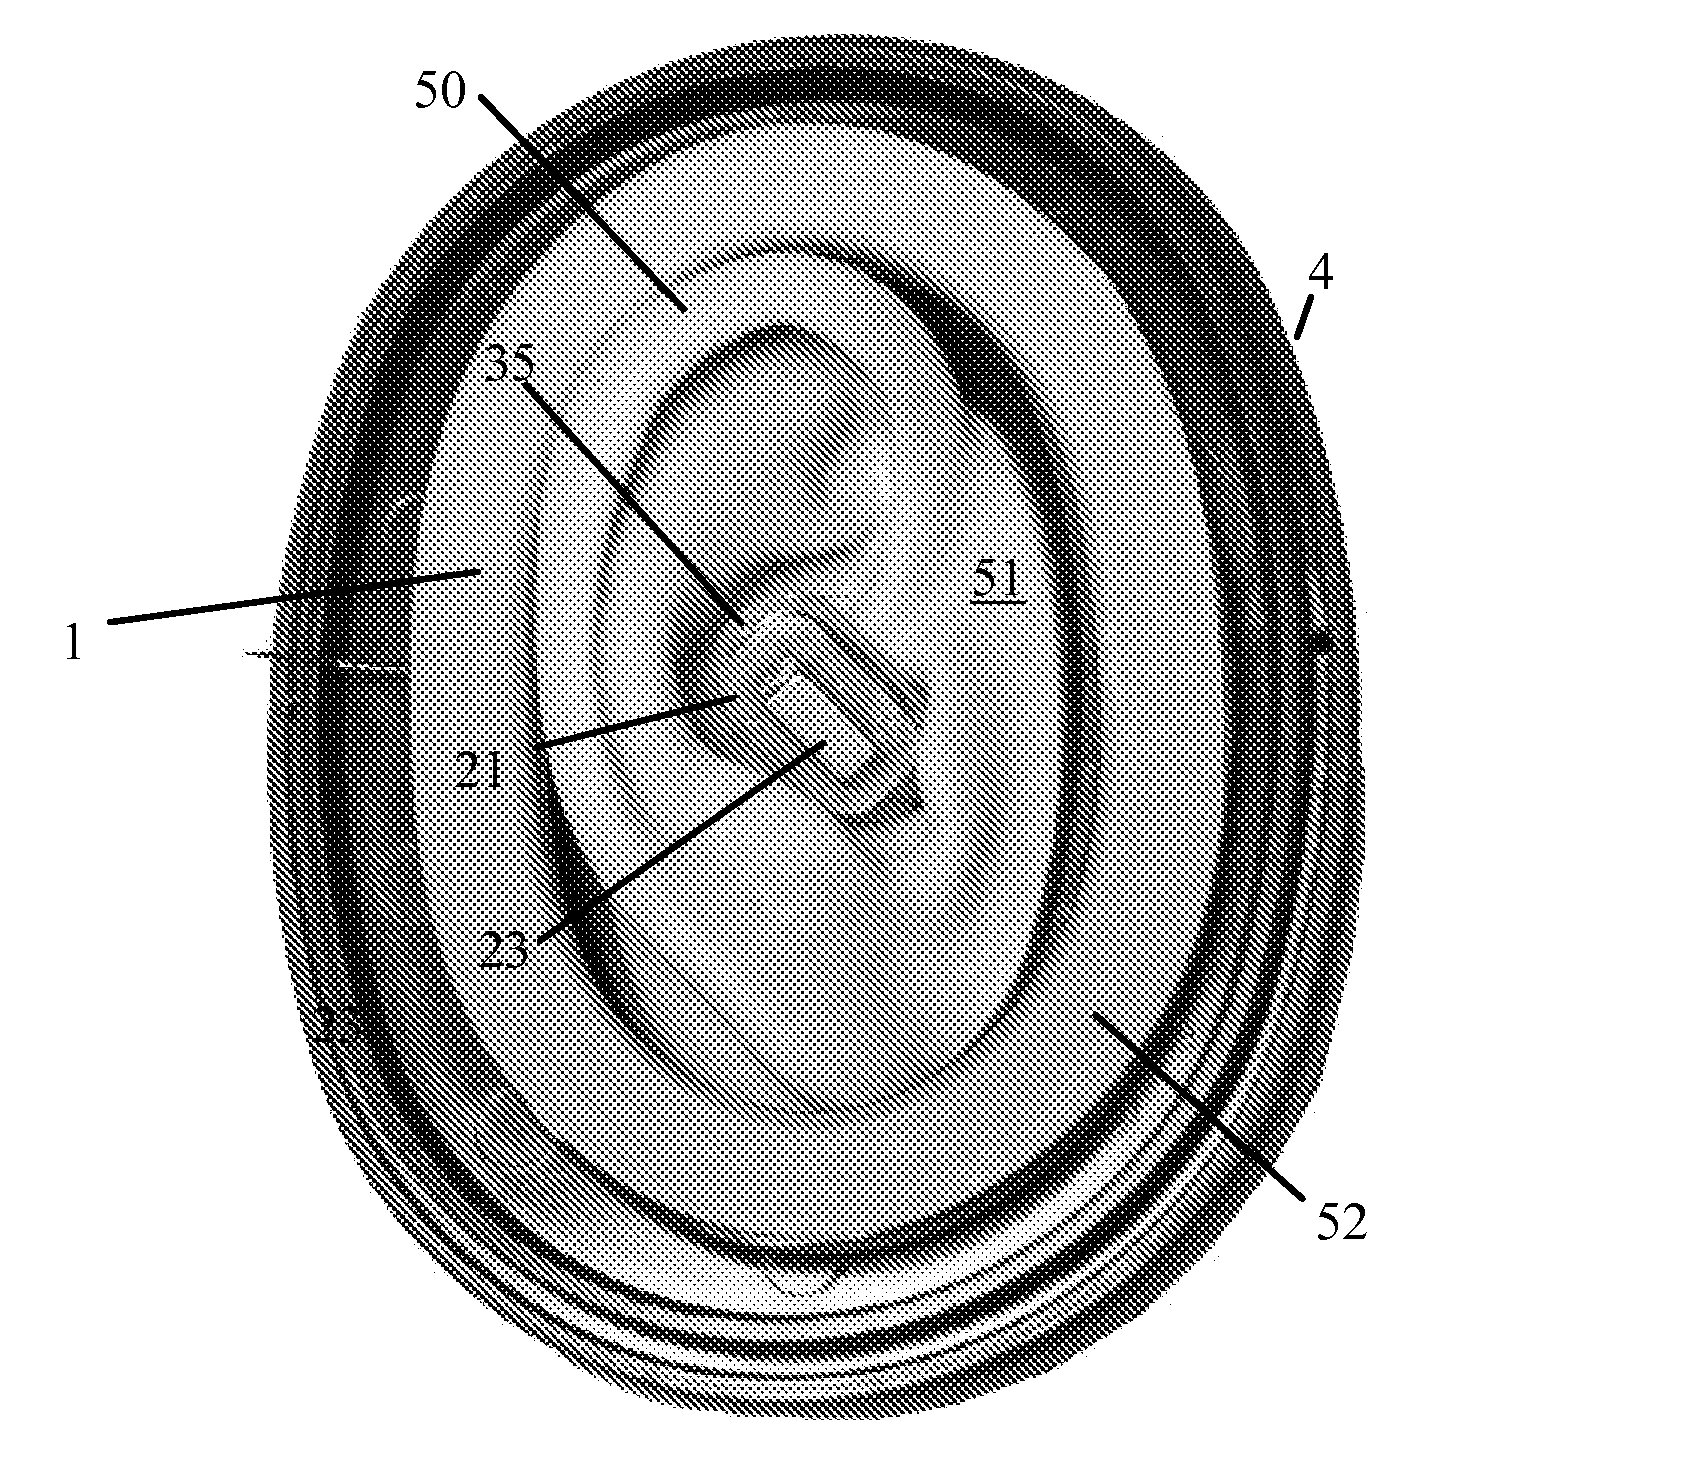 Wireless Communications Headset System Employing a Loop Transmitter that Fits Around the Pinna